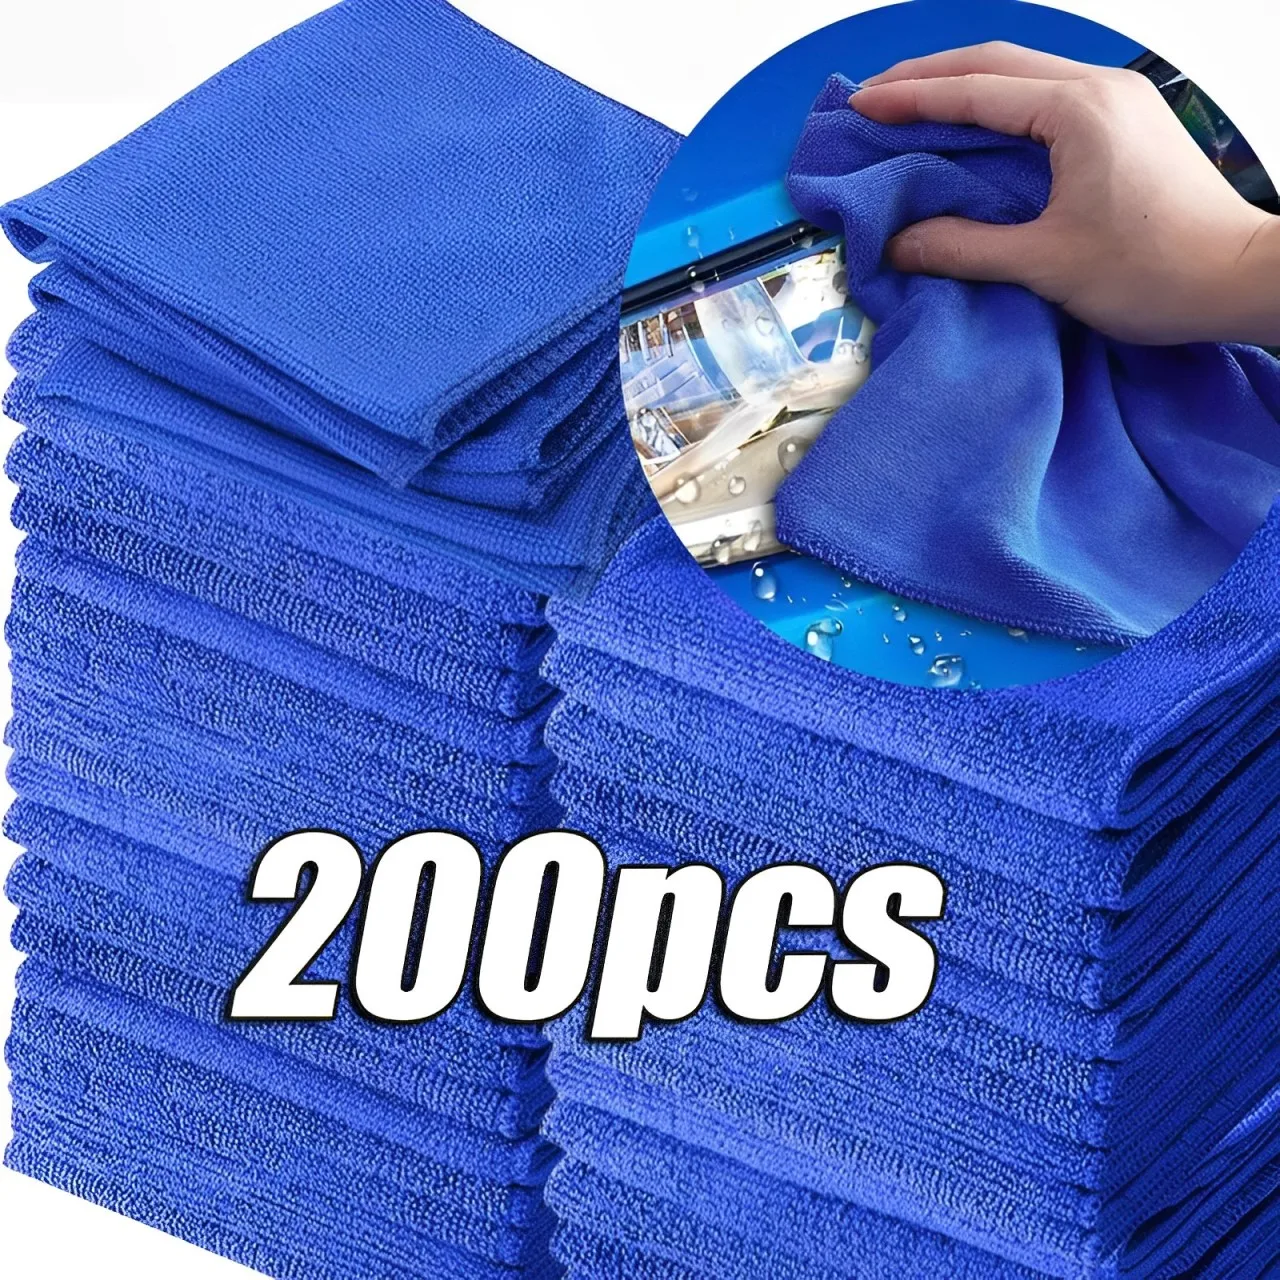 

Microfiber Towels Car Wash Drying Cloth Towel Household Cleaning Cloths Auto Detailing Polishing Cloth Home Clean Tools Rags